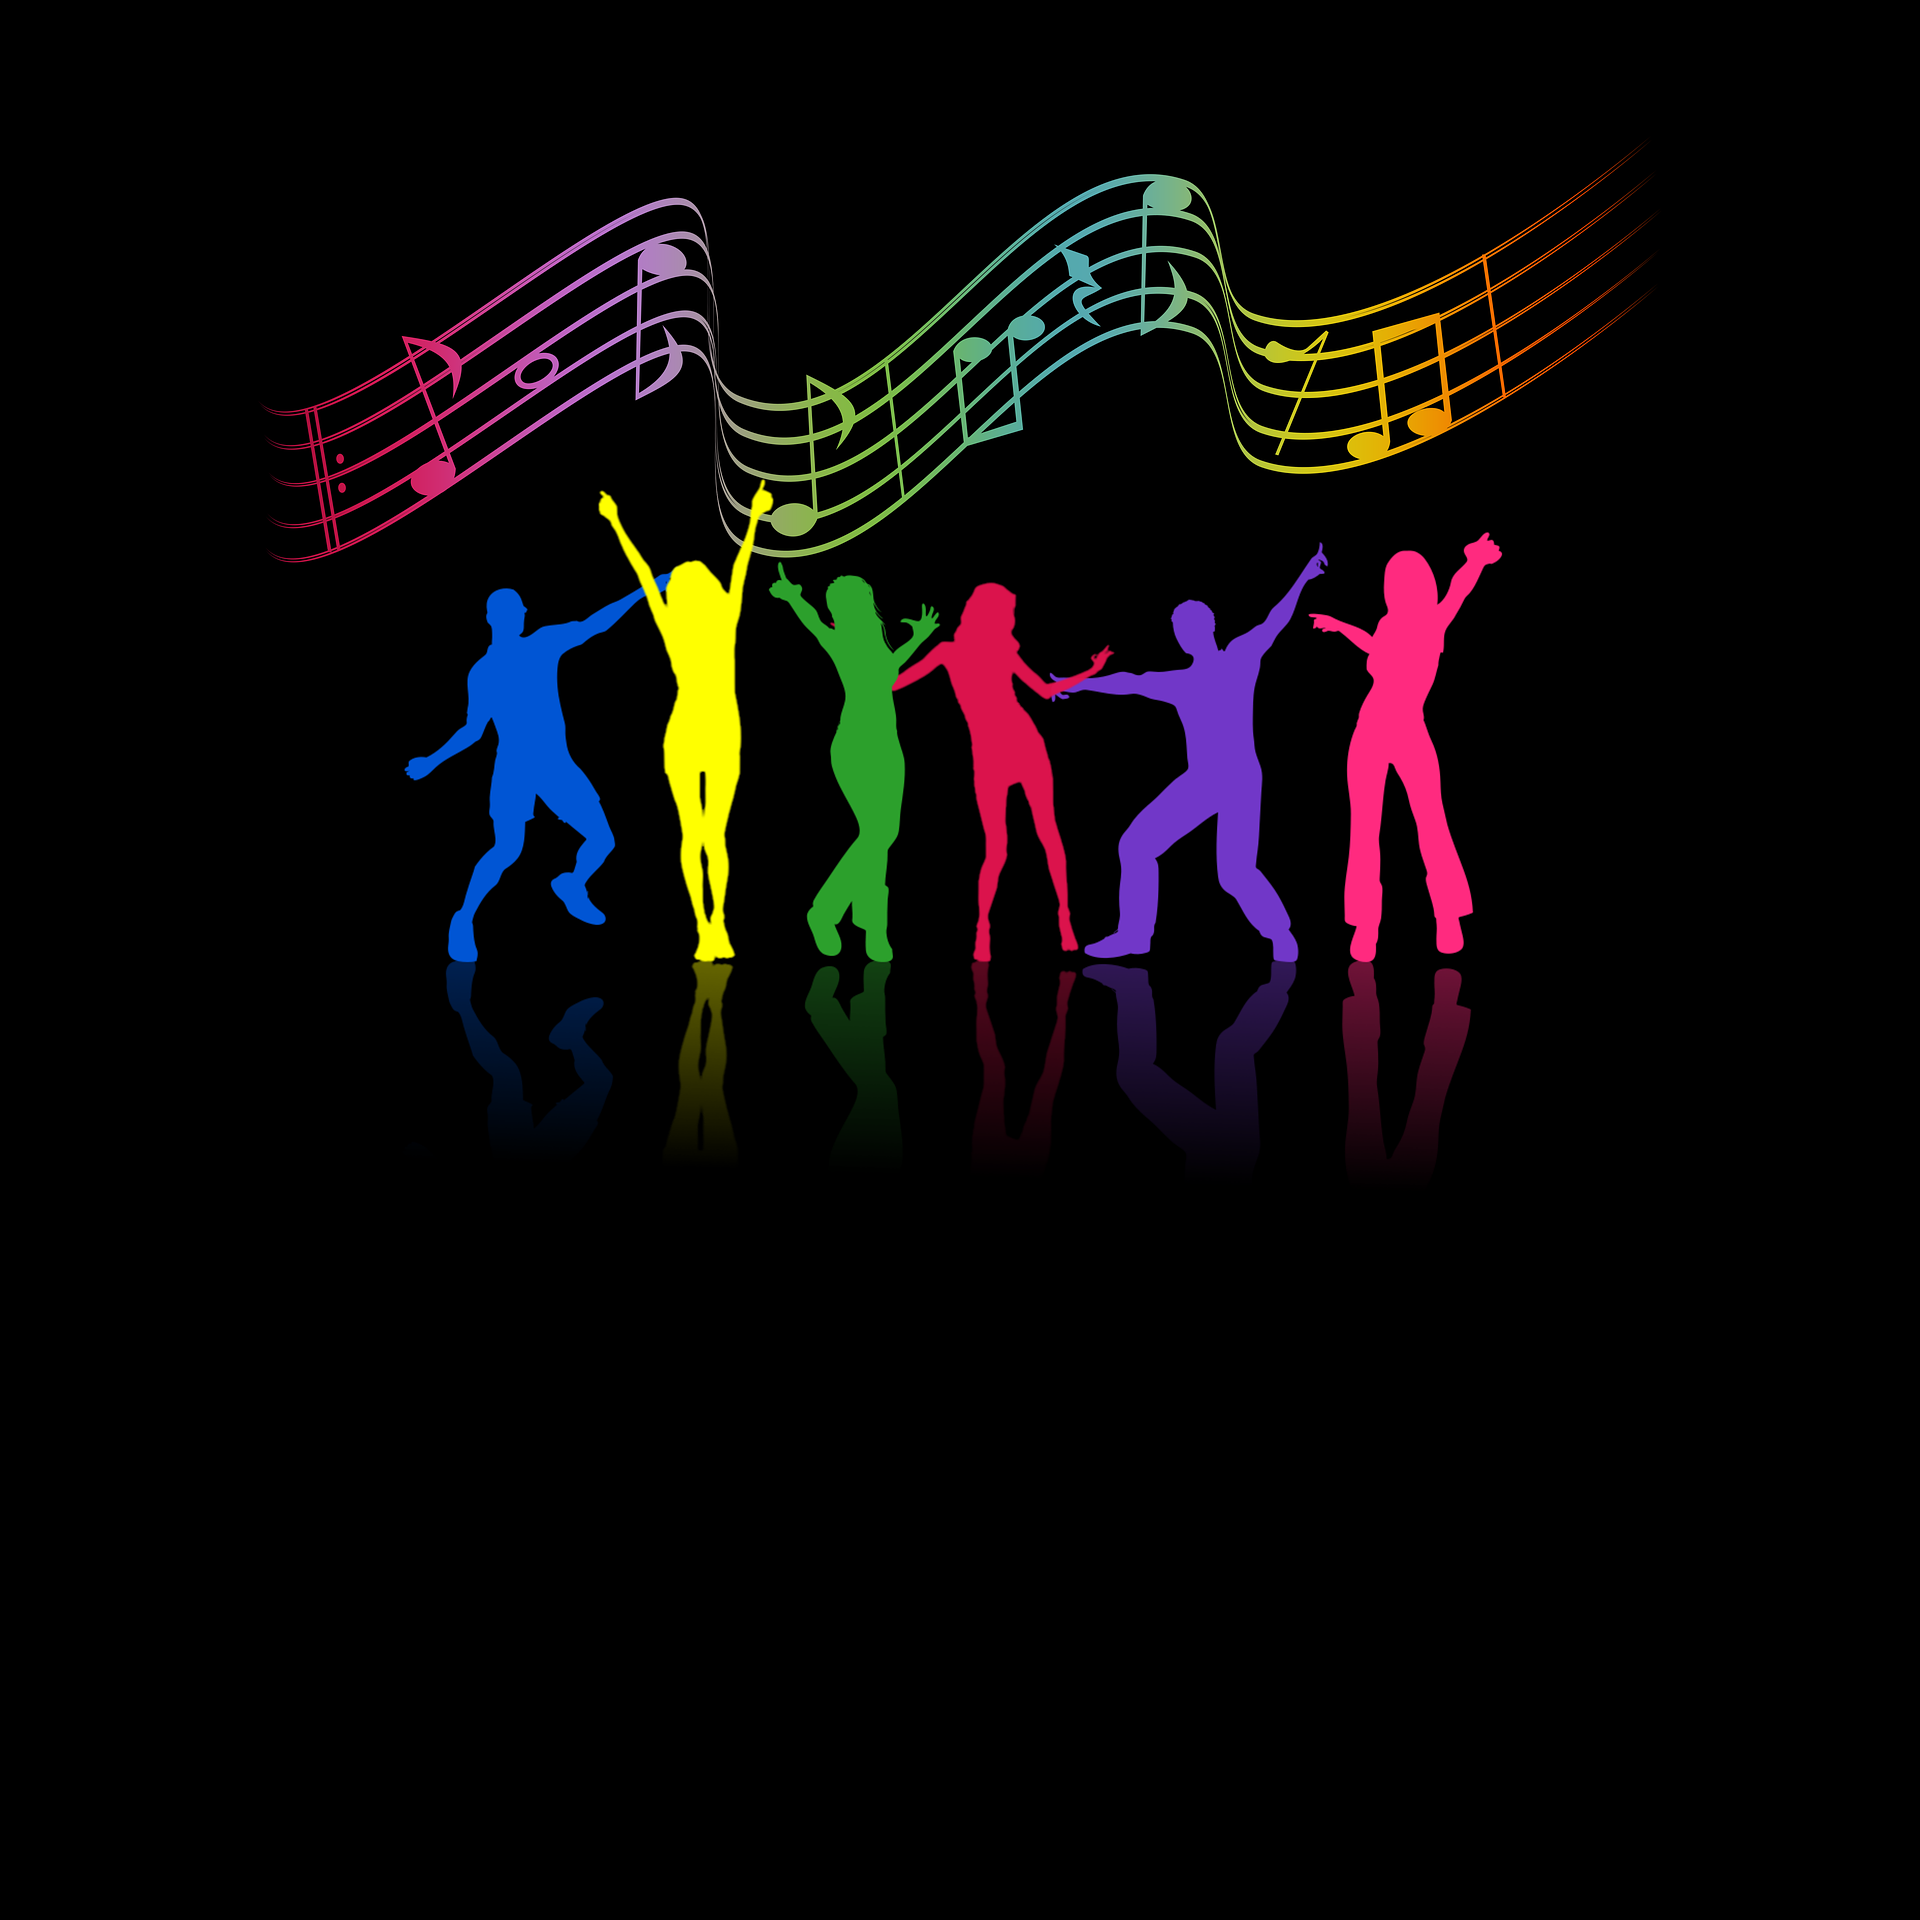 Brightly colored silhouettes dancing on a black background